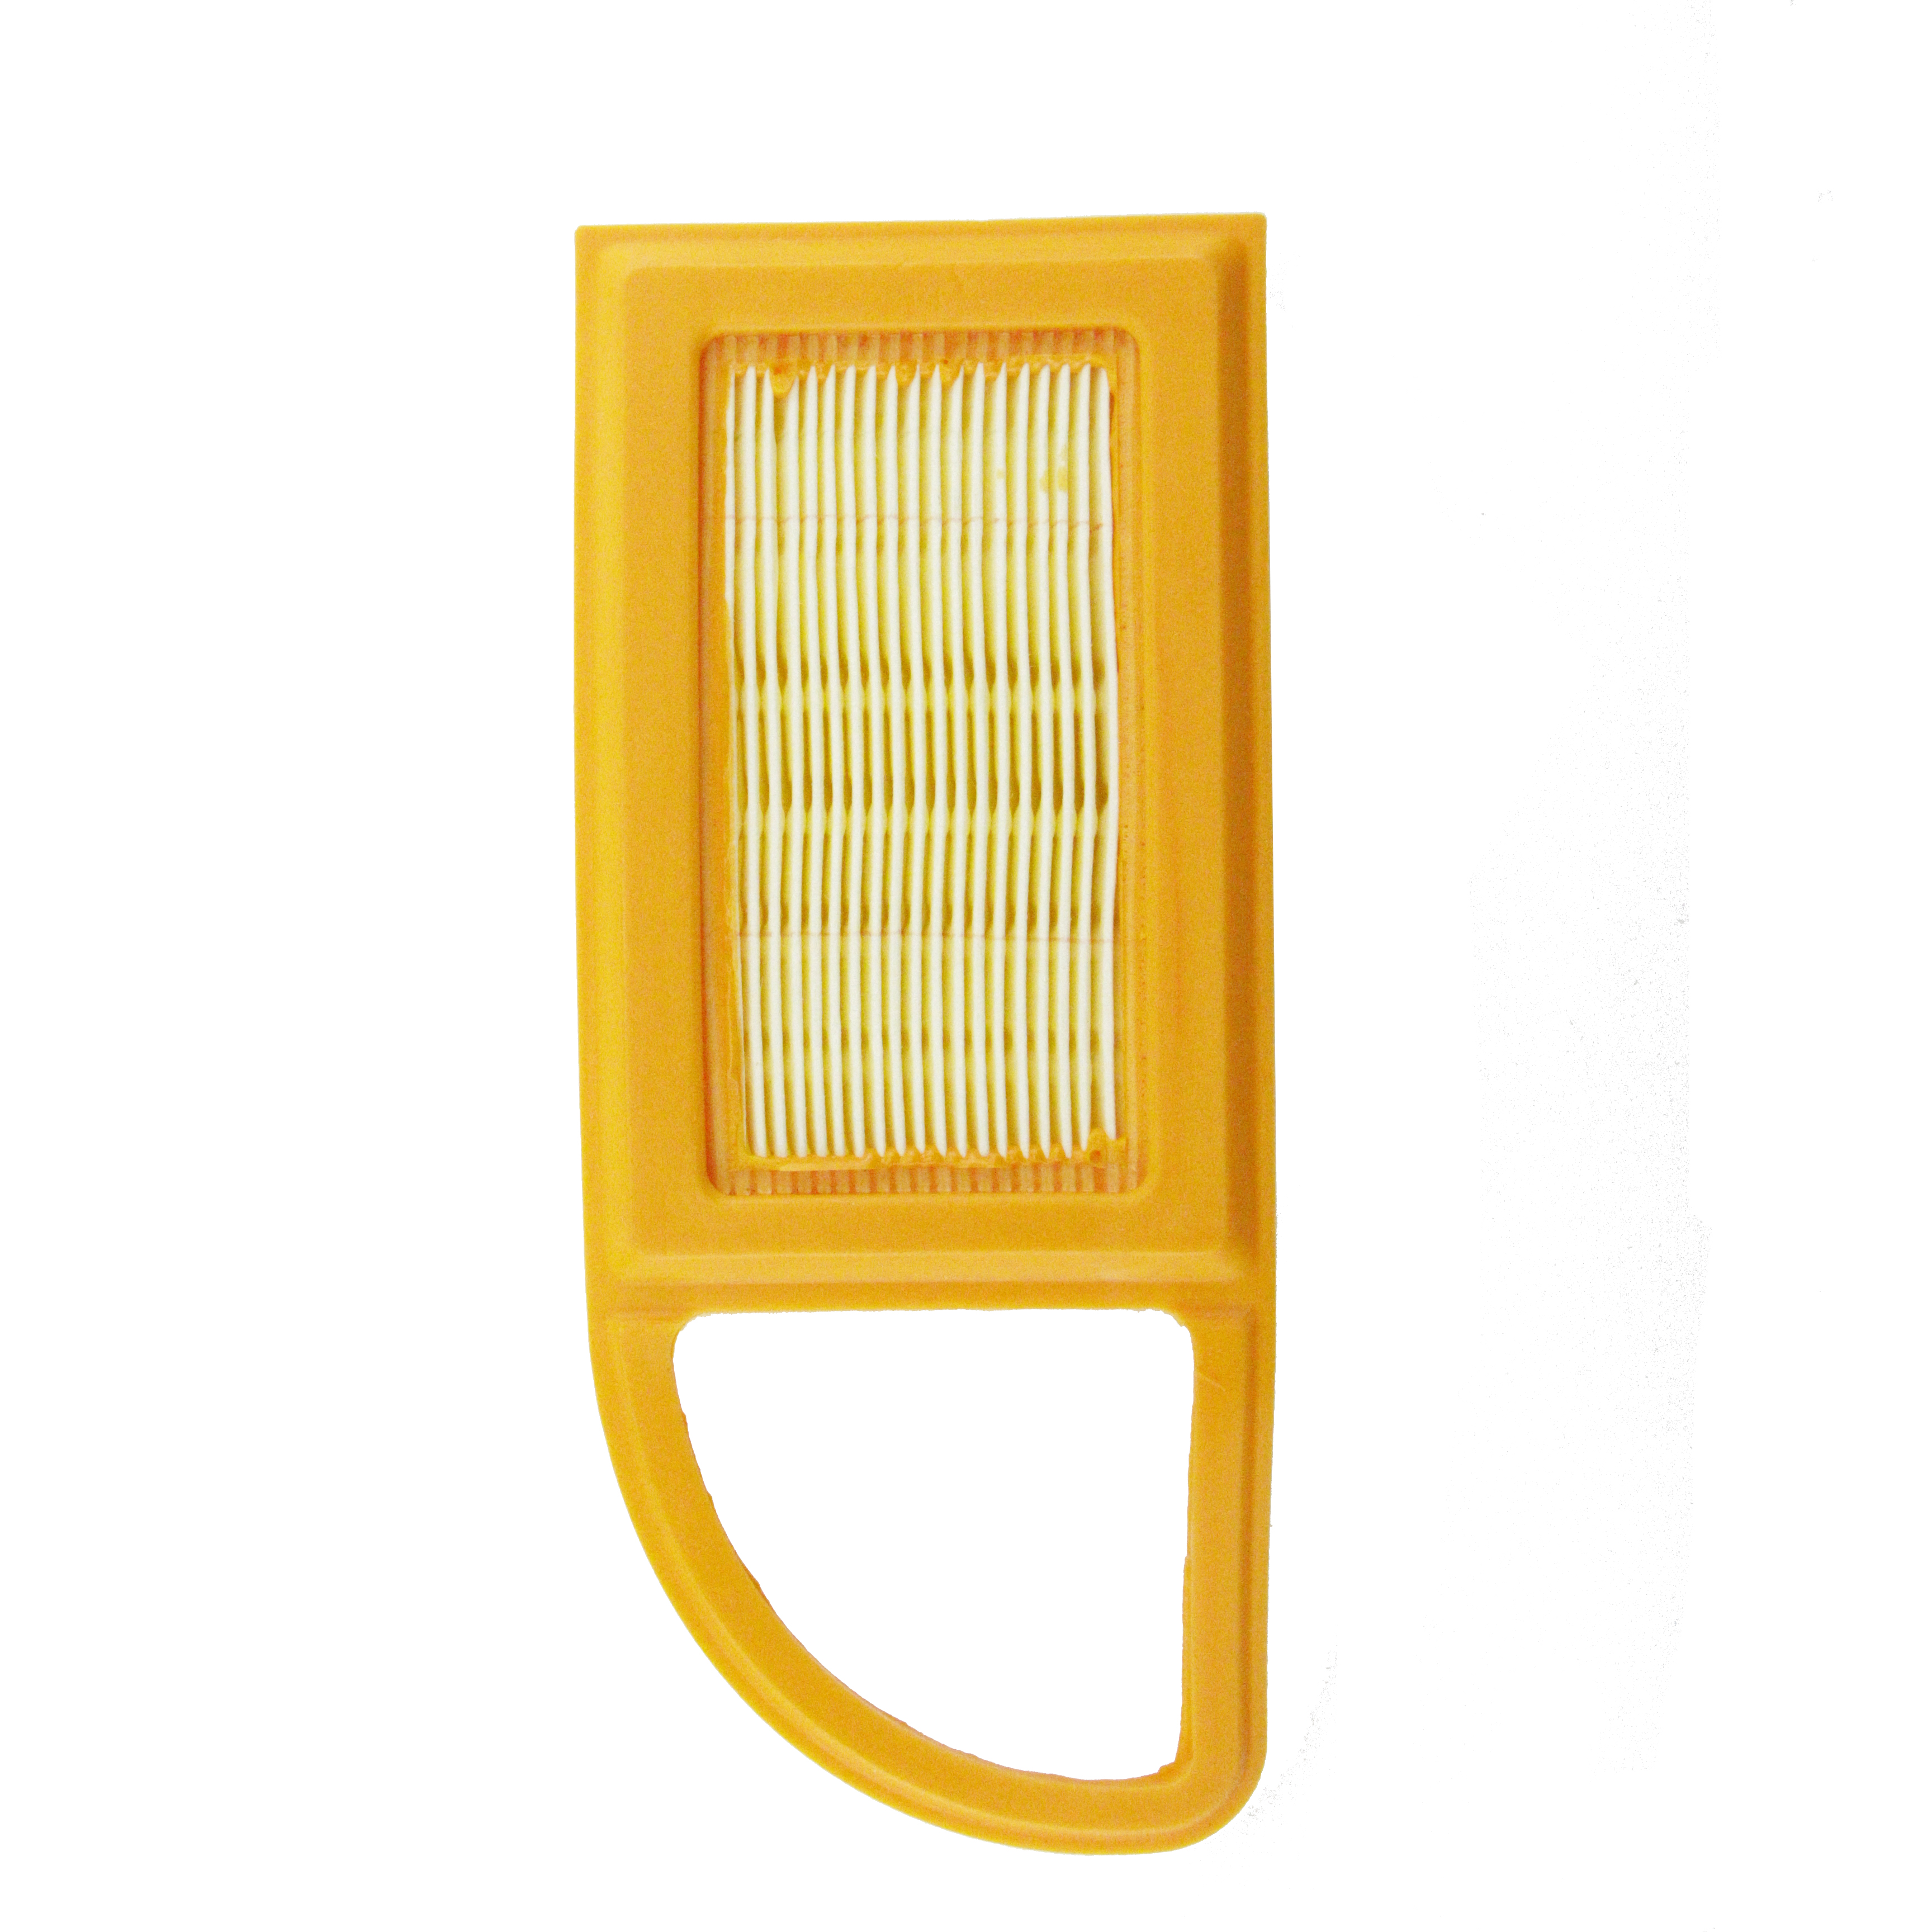 Air Filter Cleaner For Stihl BR500 BR550 BR600 Blowers 4282 141 0300